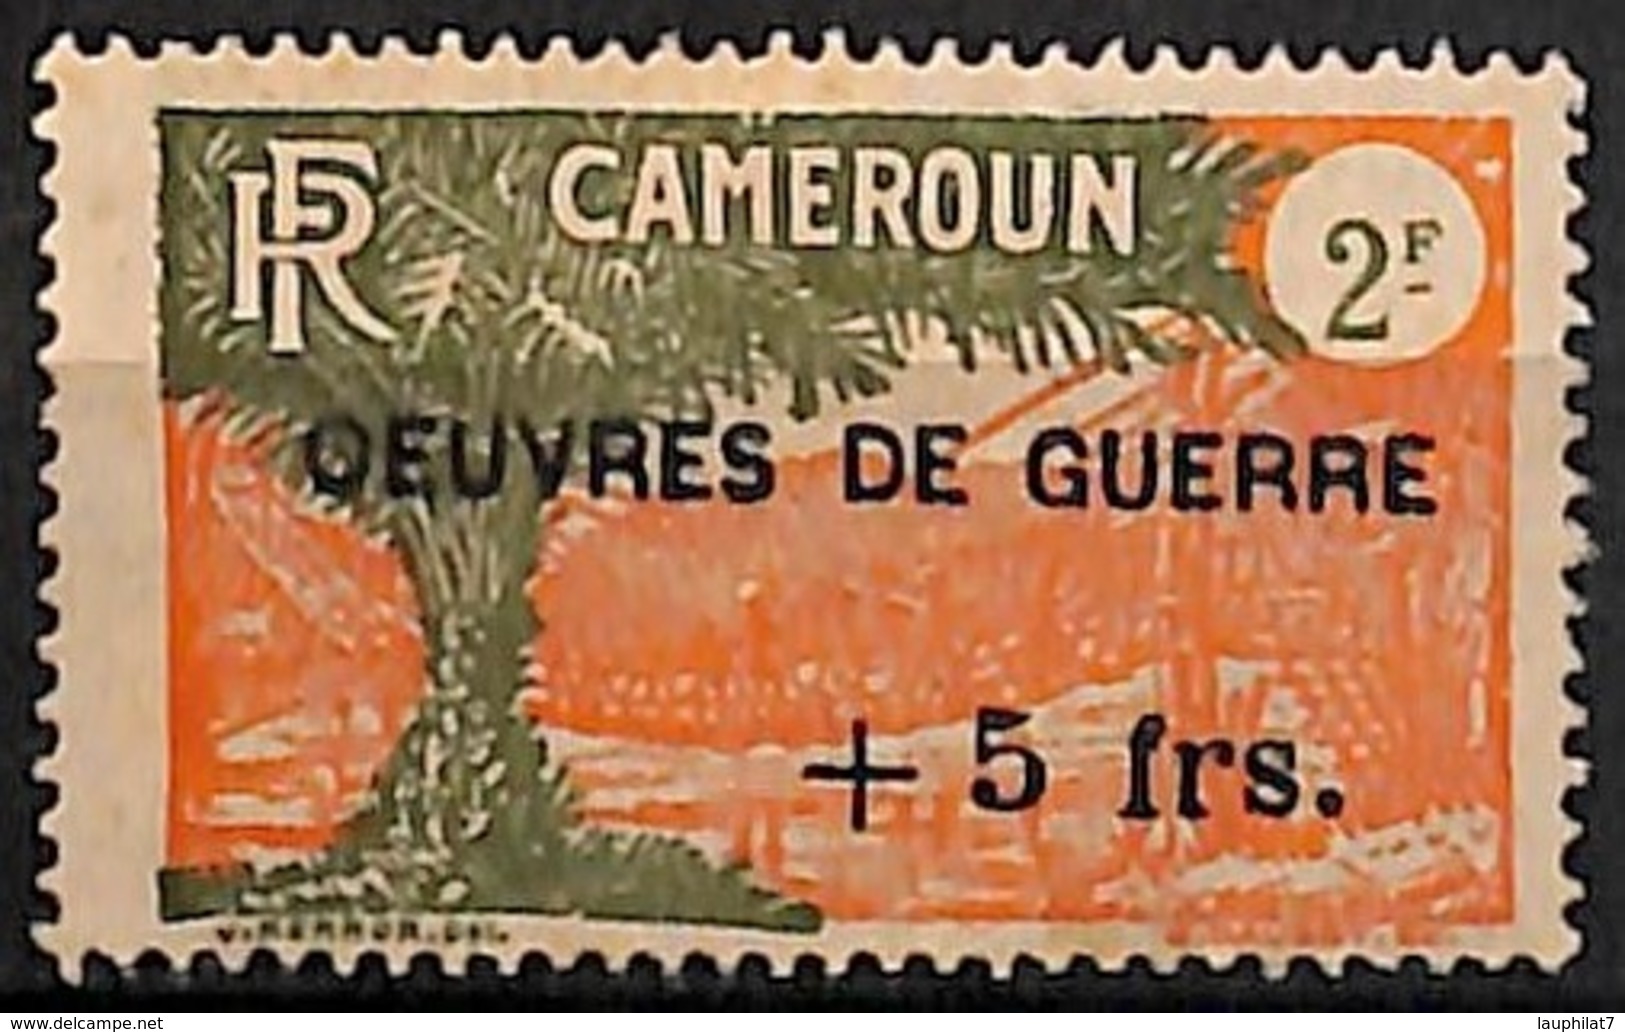 [827680]Cameroun 1940 - N° 235, +5F/2F, OEUVRES DE GUERRE, Colonies - Neufs